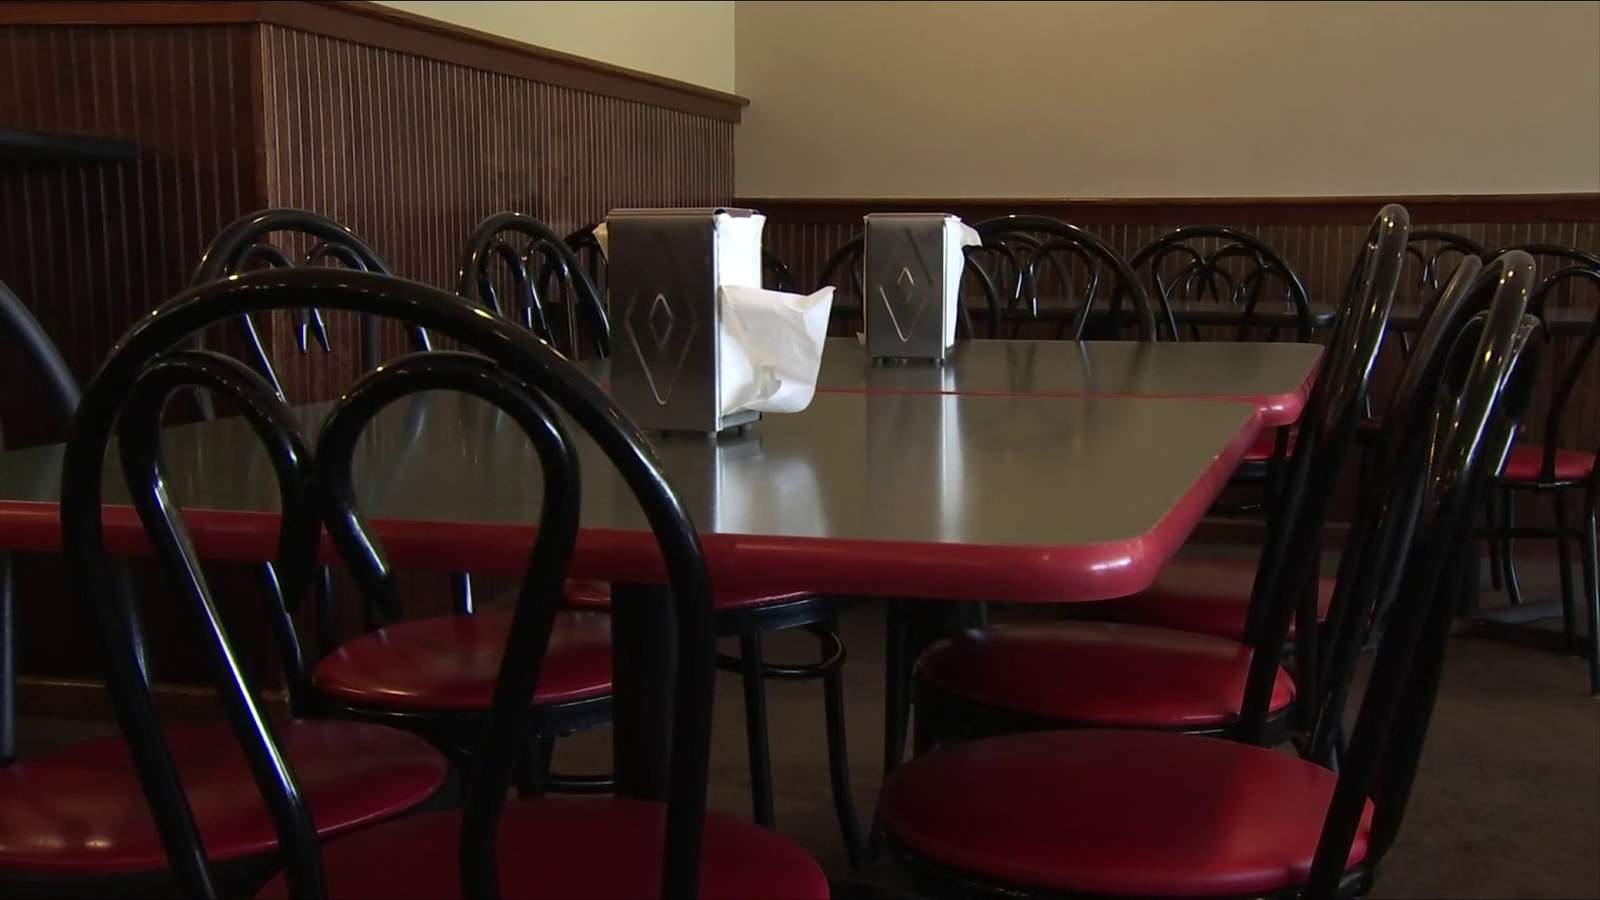 Nervous going out to eat? Health officials, patrons, restaurant owners weigh in